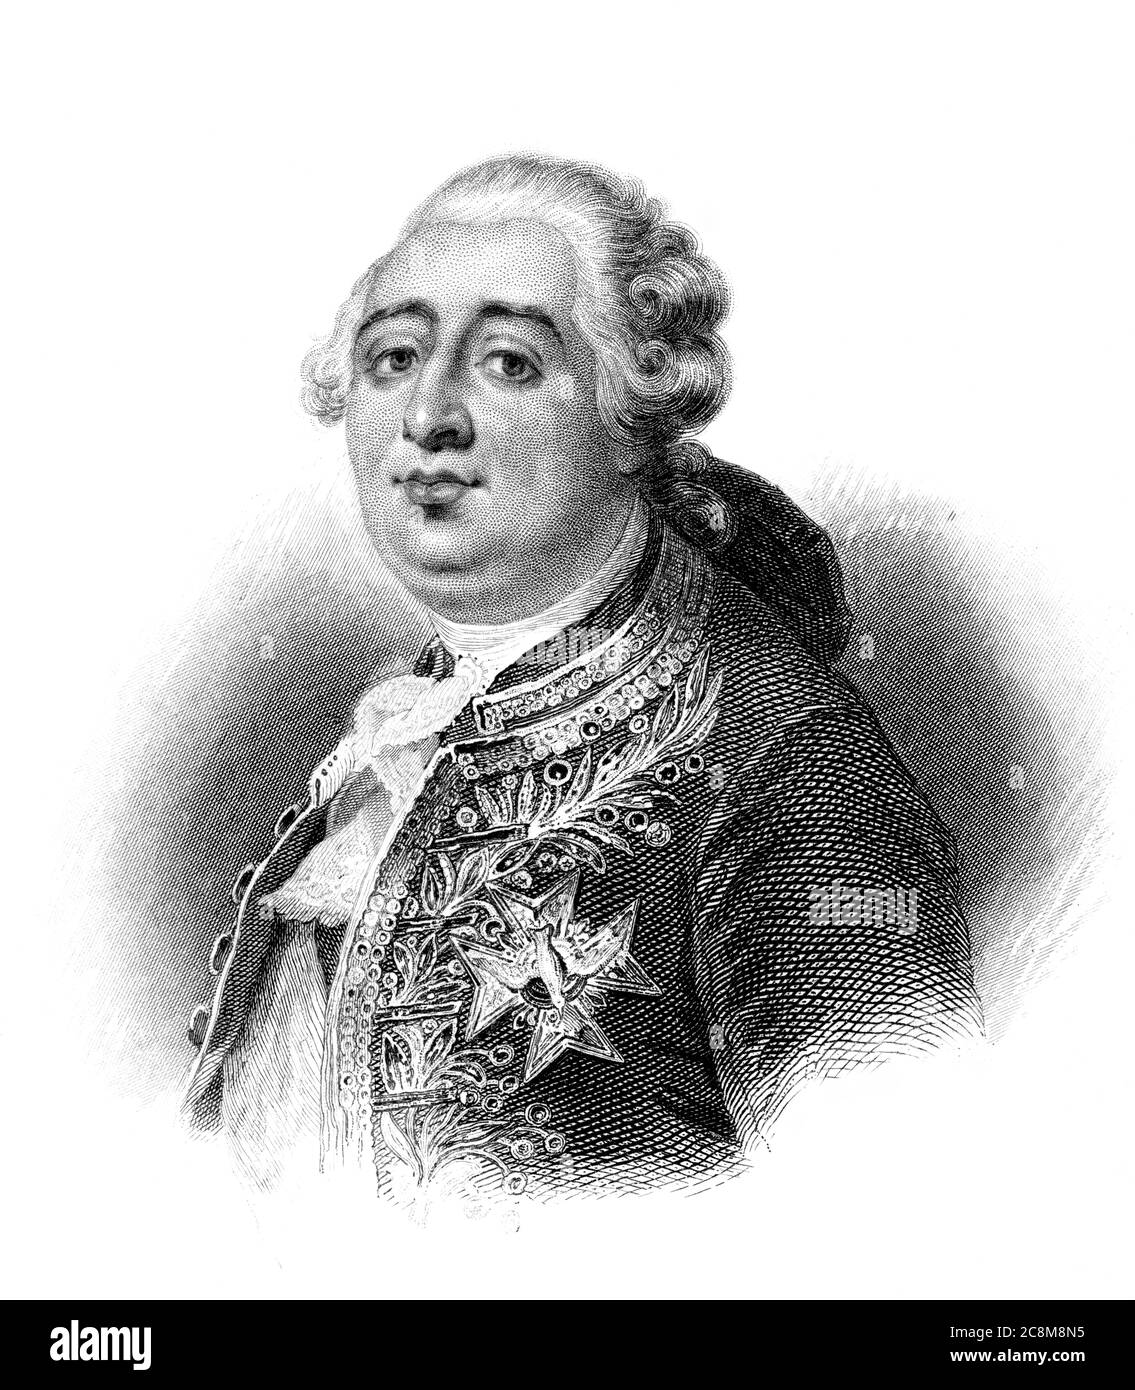 An engraved illustration portrait of King Louis XVI during the French Revolution in France from a Victorian book dated 1881 that is no longer in copyr Stock Photo